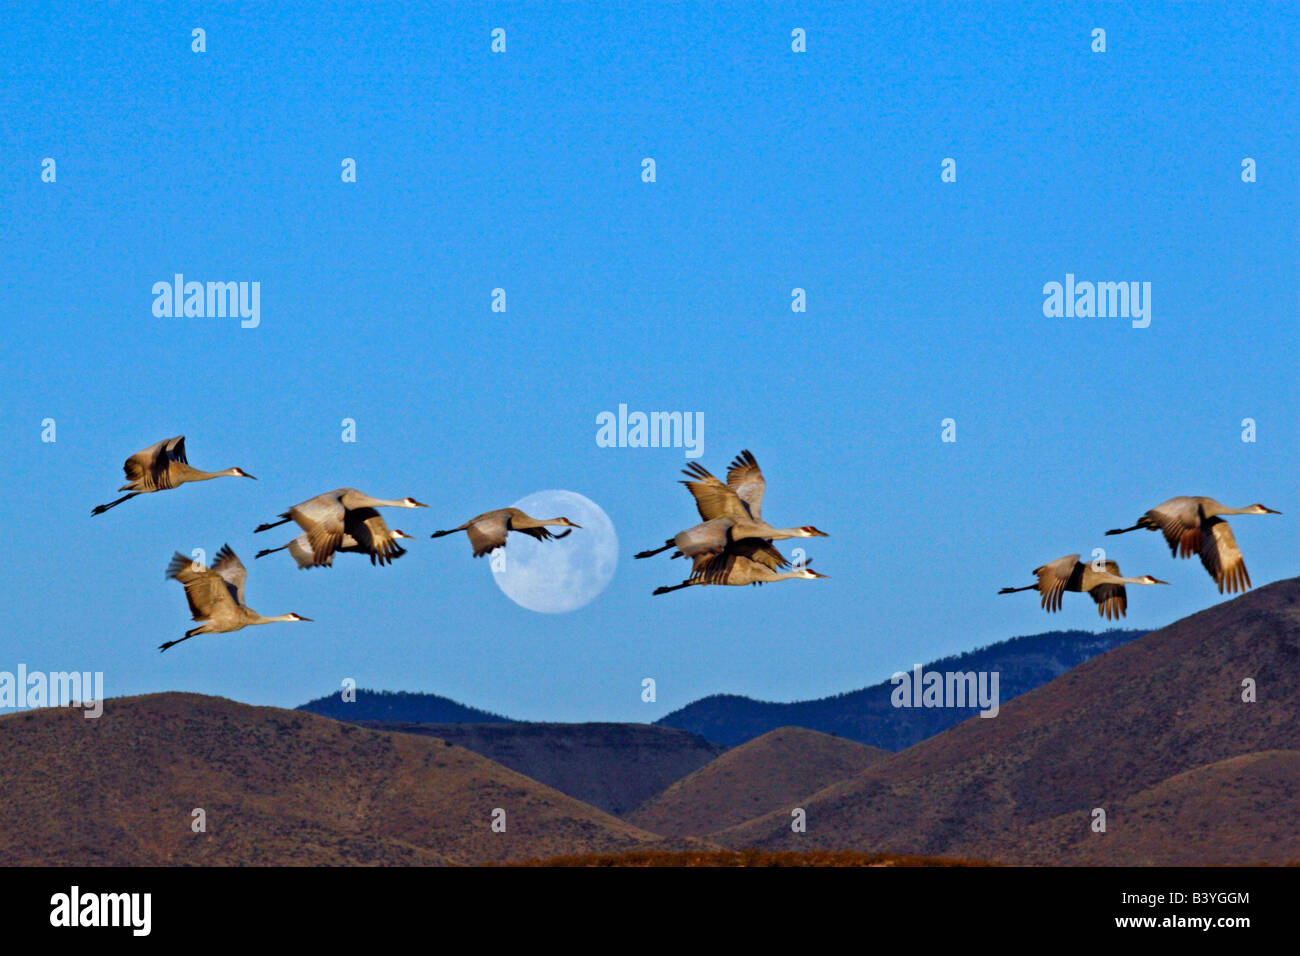 USA, New Mexico, Bosque Del Apache National Wildlife Refuge. Sandhill cranes (Grus canadensis) flying past a setting full moon. Stock Photo